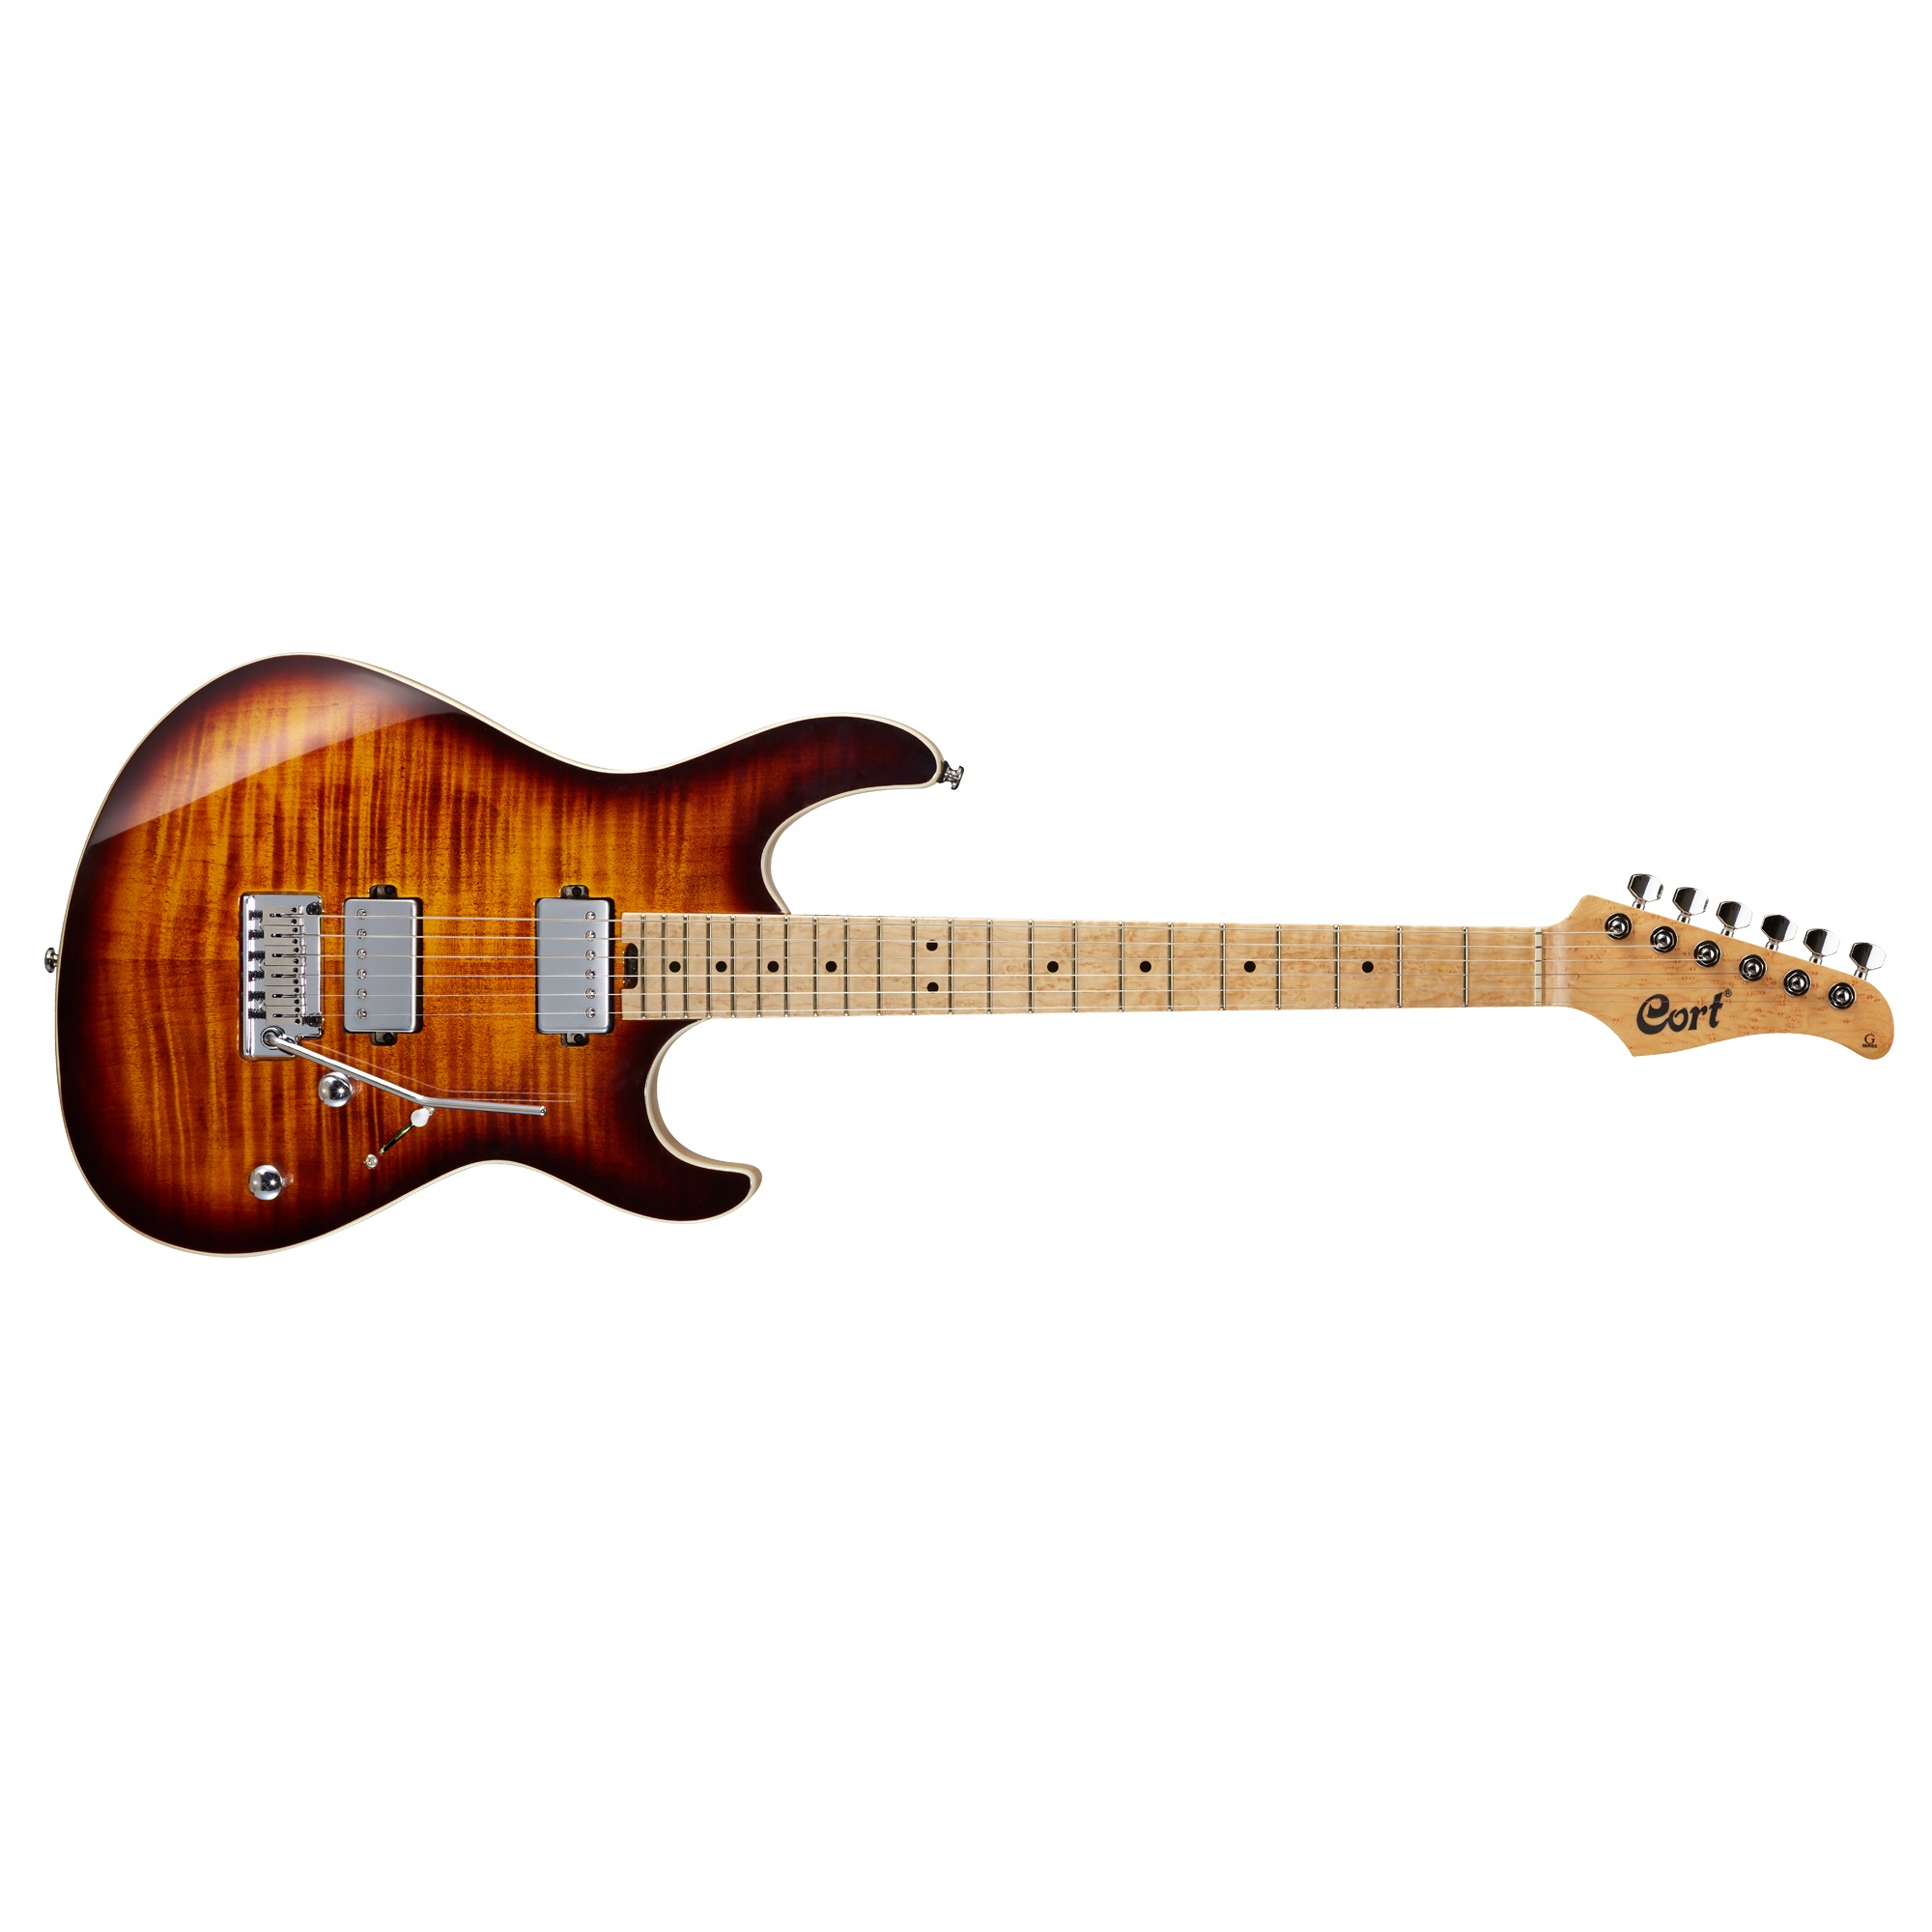 Cort G290 FAT Electric Guitar online price in india